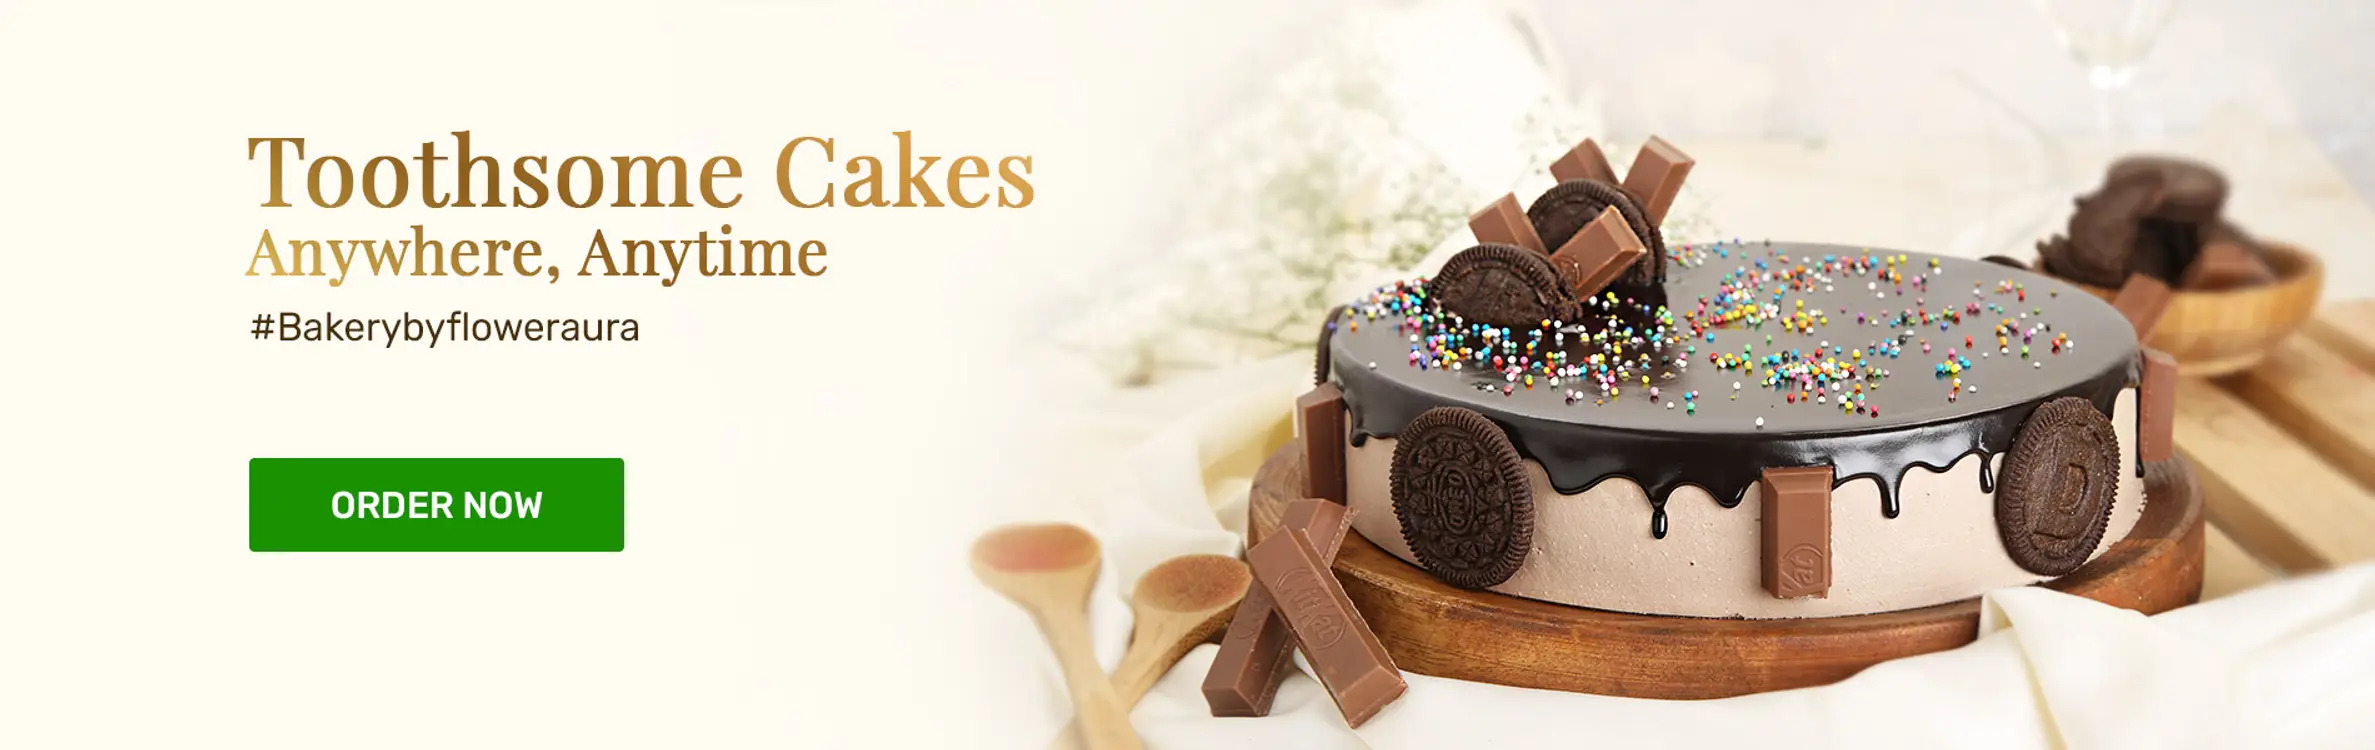 Final-Home-Page-banner-for-Toothsome-cakes